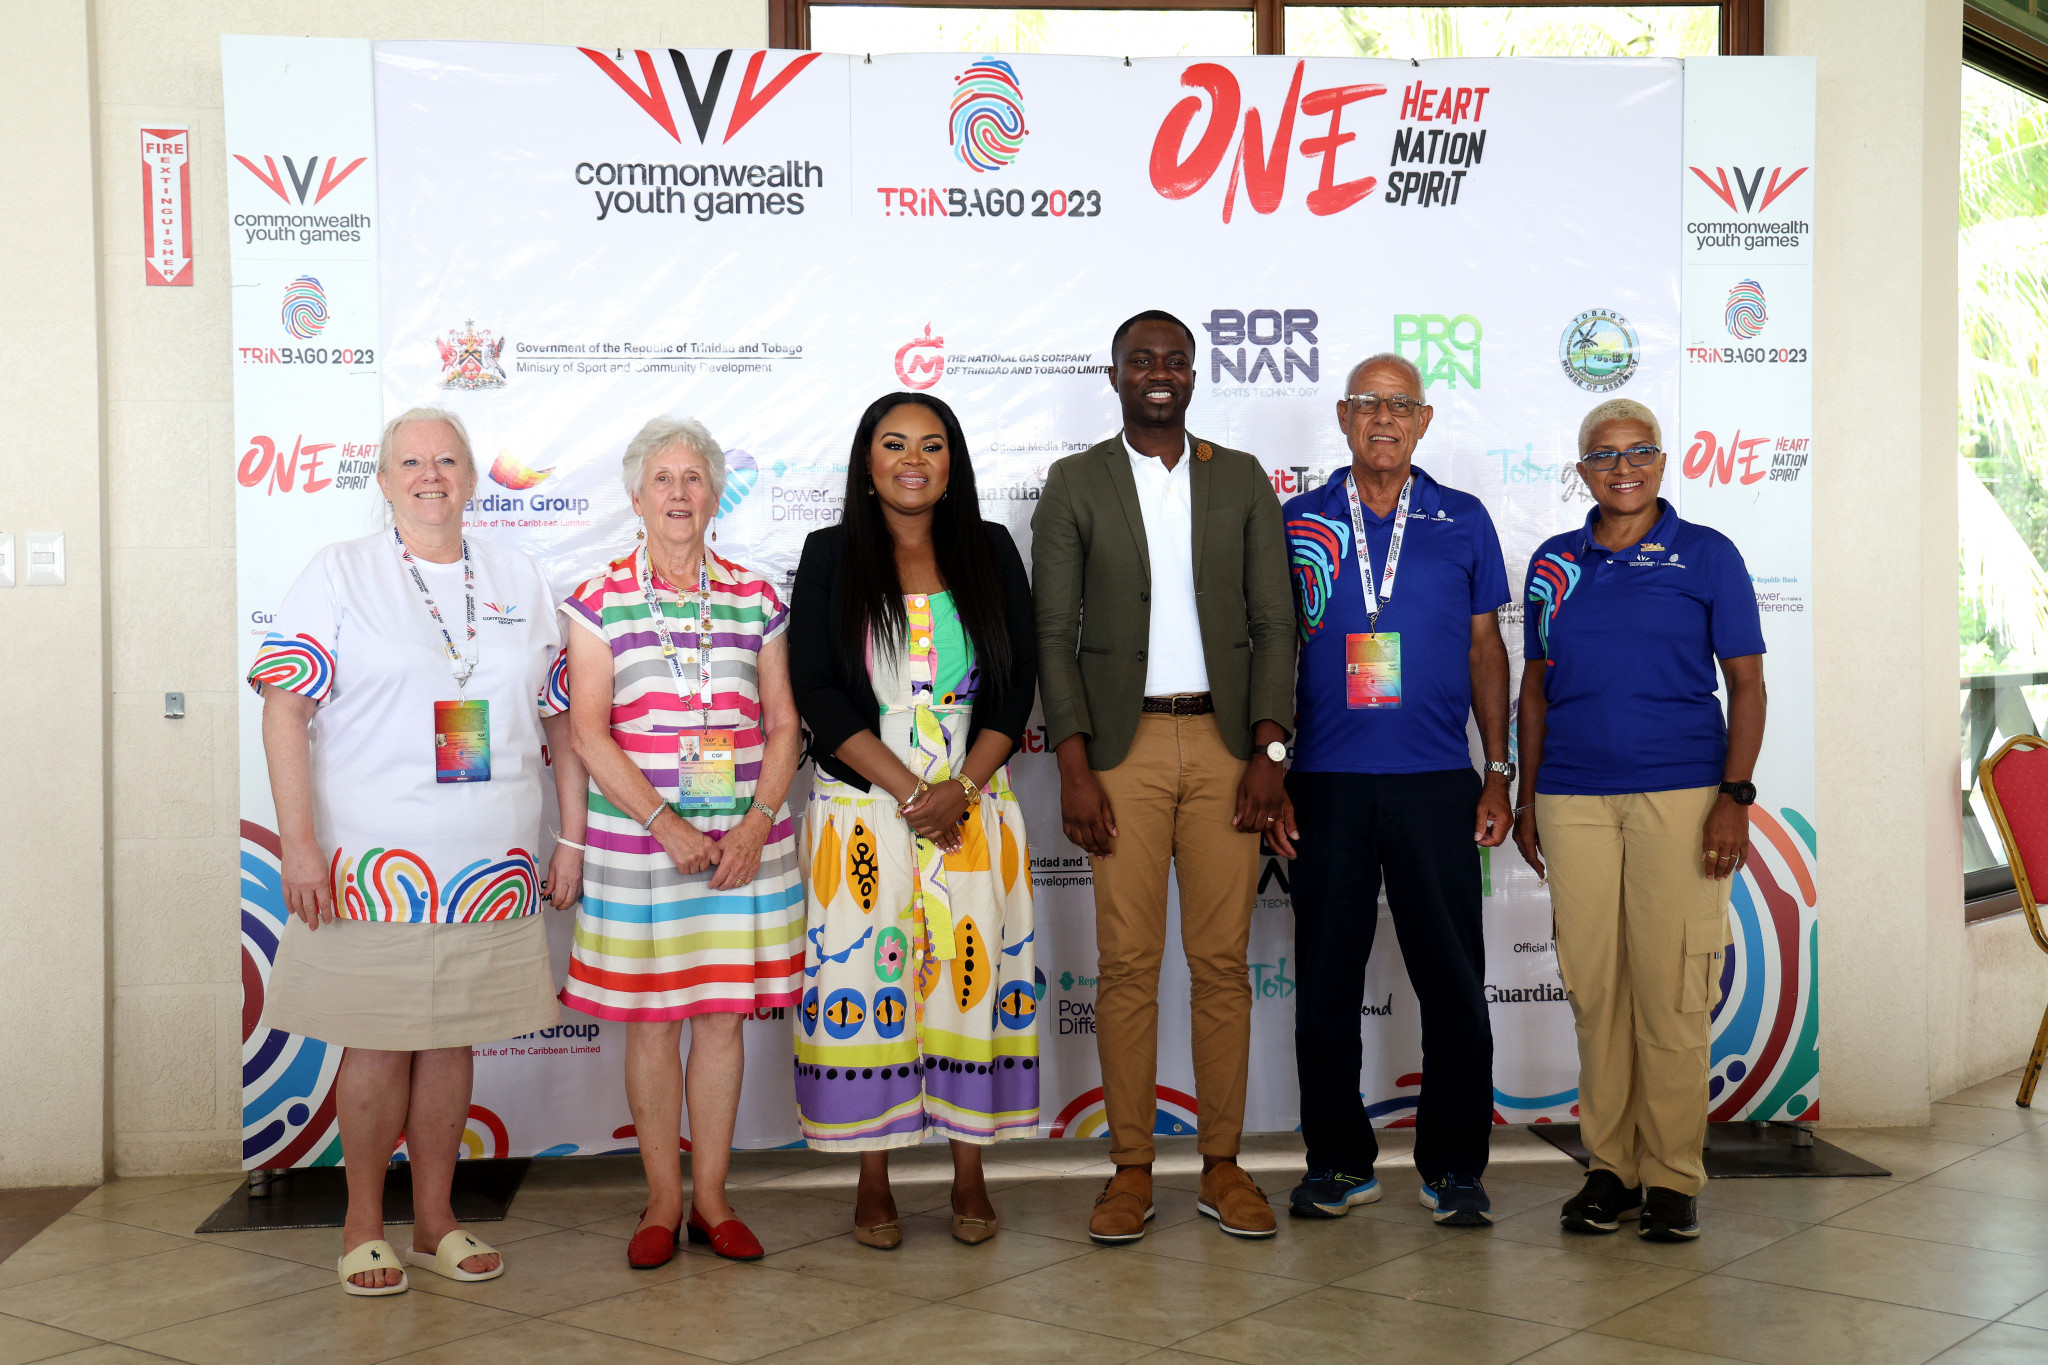 Officials from the Commonwealth Games Federation and Trinidad and Tobago expressed their thanks after the successful staging of the Commonwealth Youth Games ©Getty Images (Image obtained at insidethegames.biz)